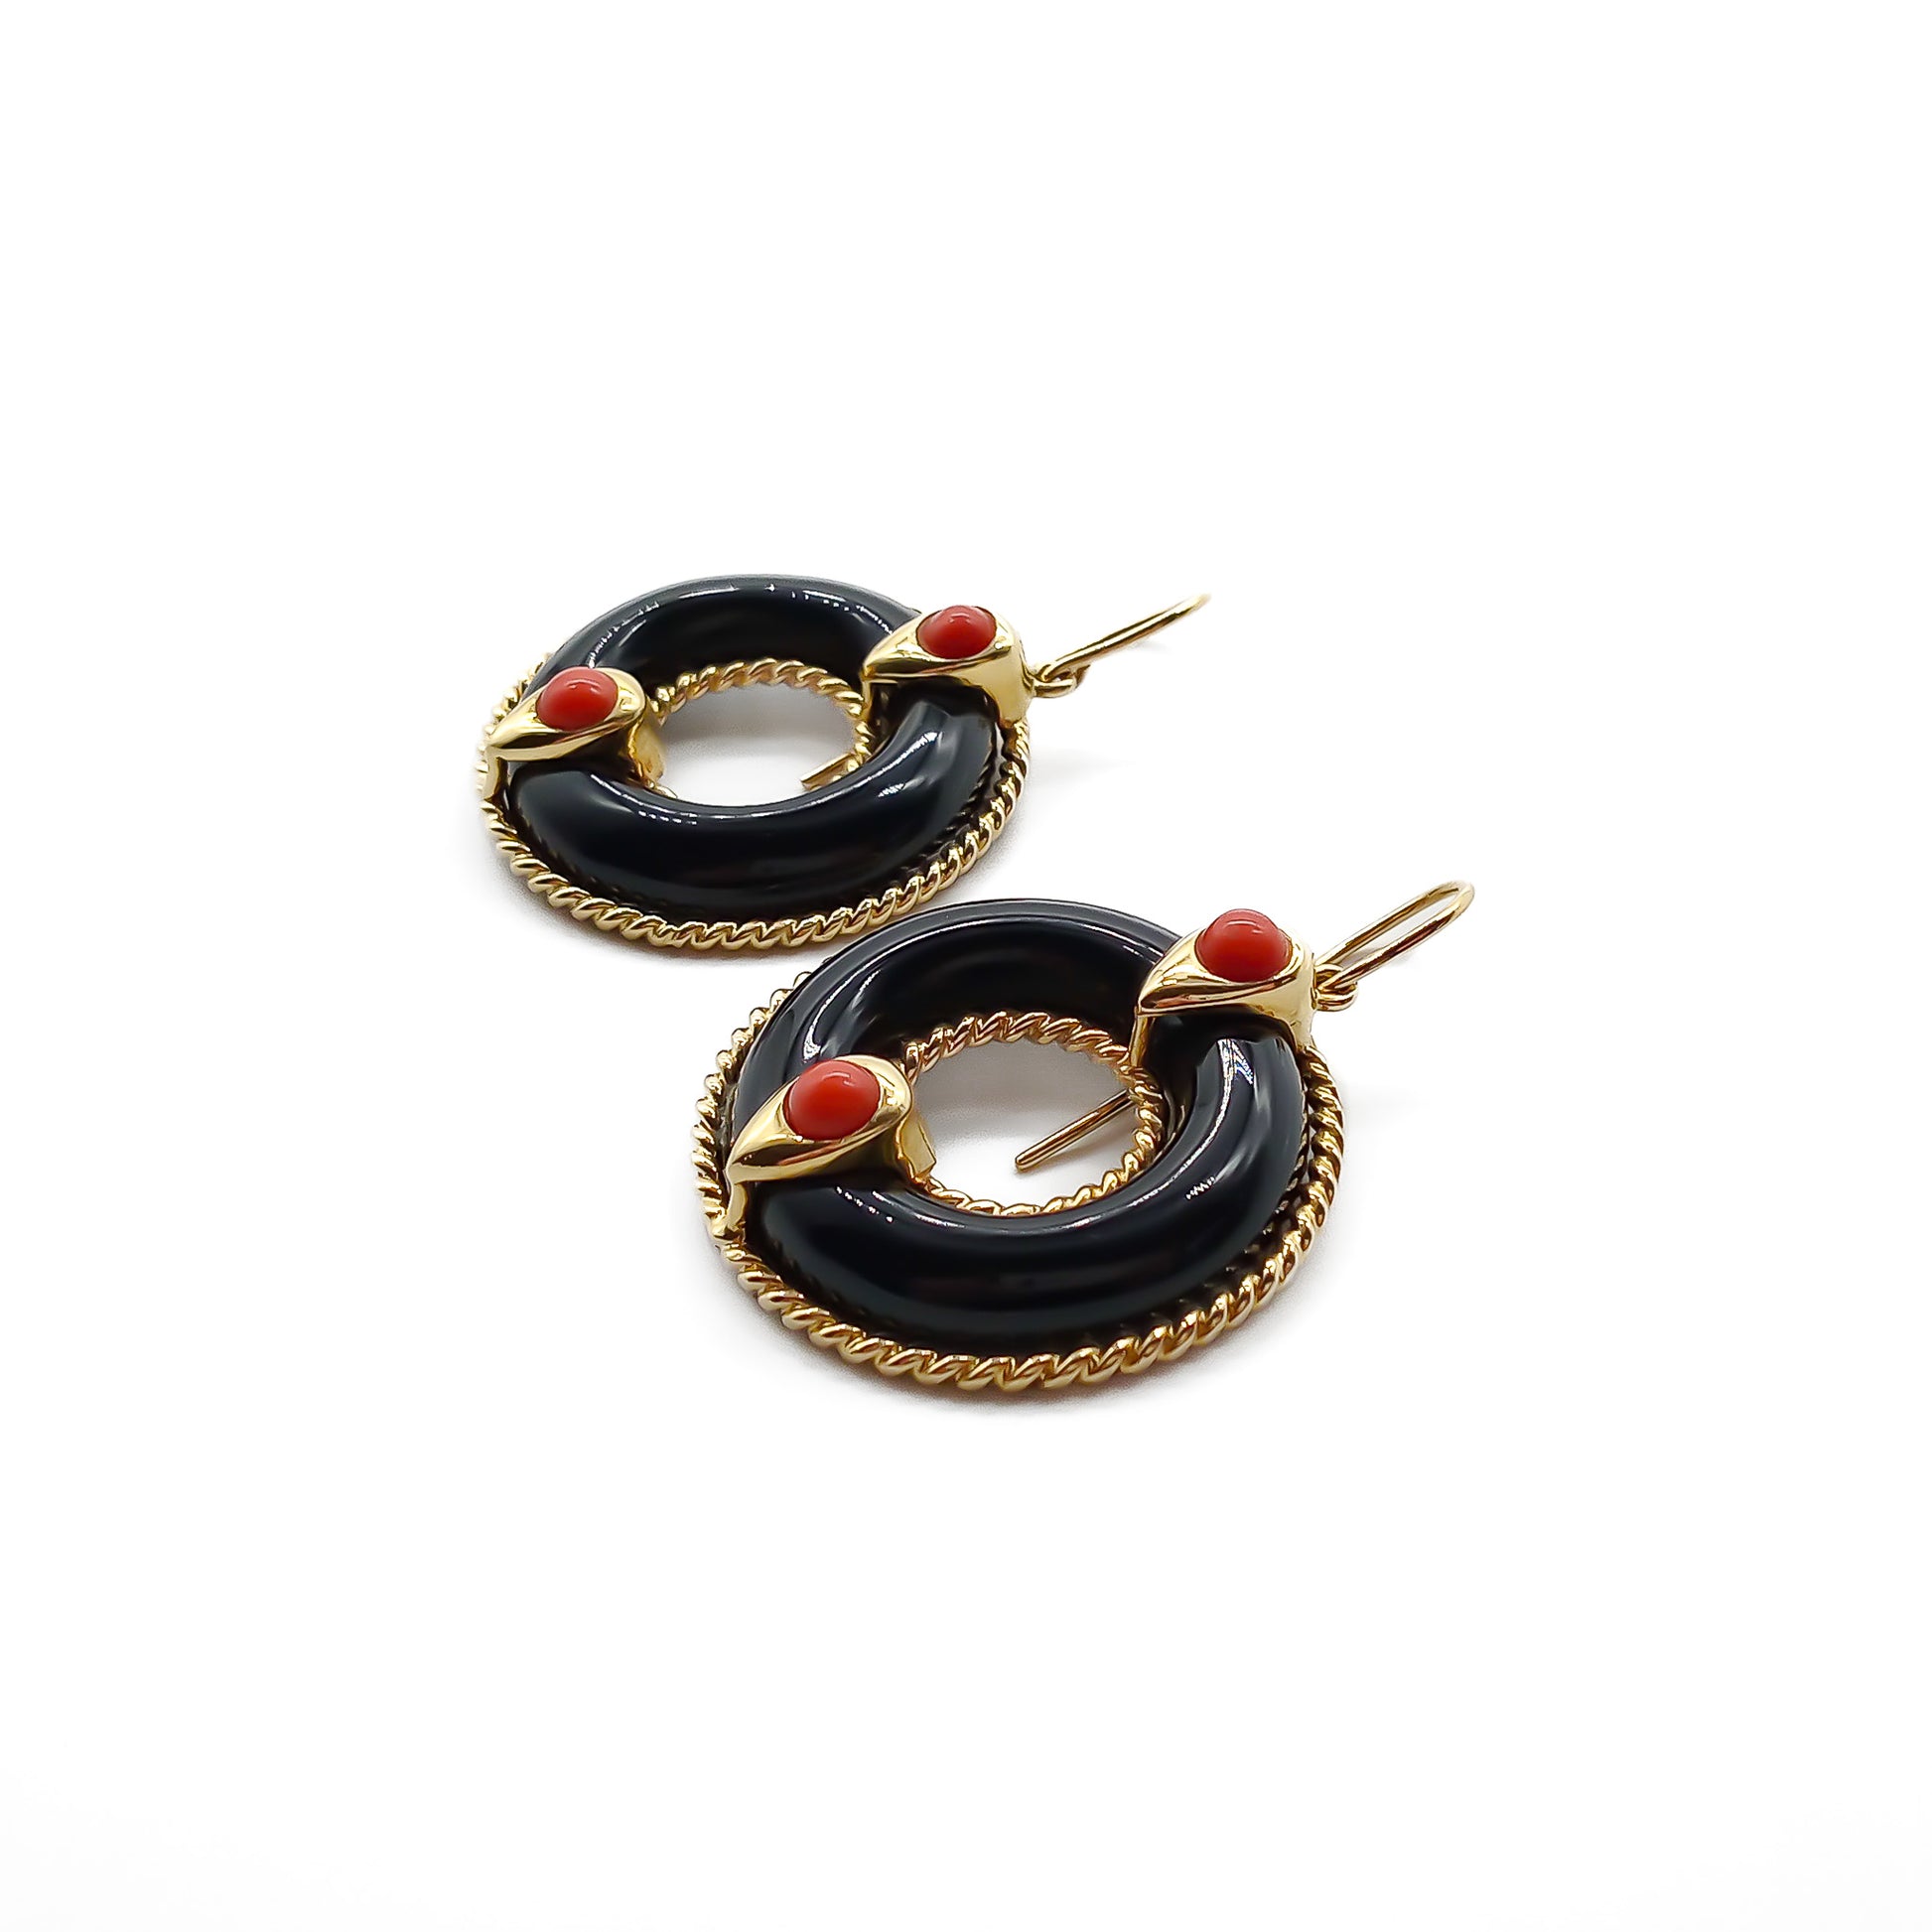 Glamorous large 18ct gold drop earrings, each set with a circular onyx and two Mediterranean coral cabochons. Italy